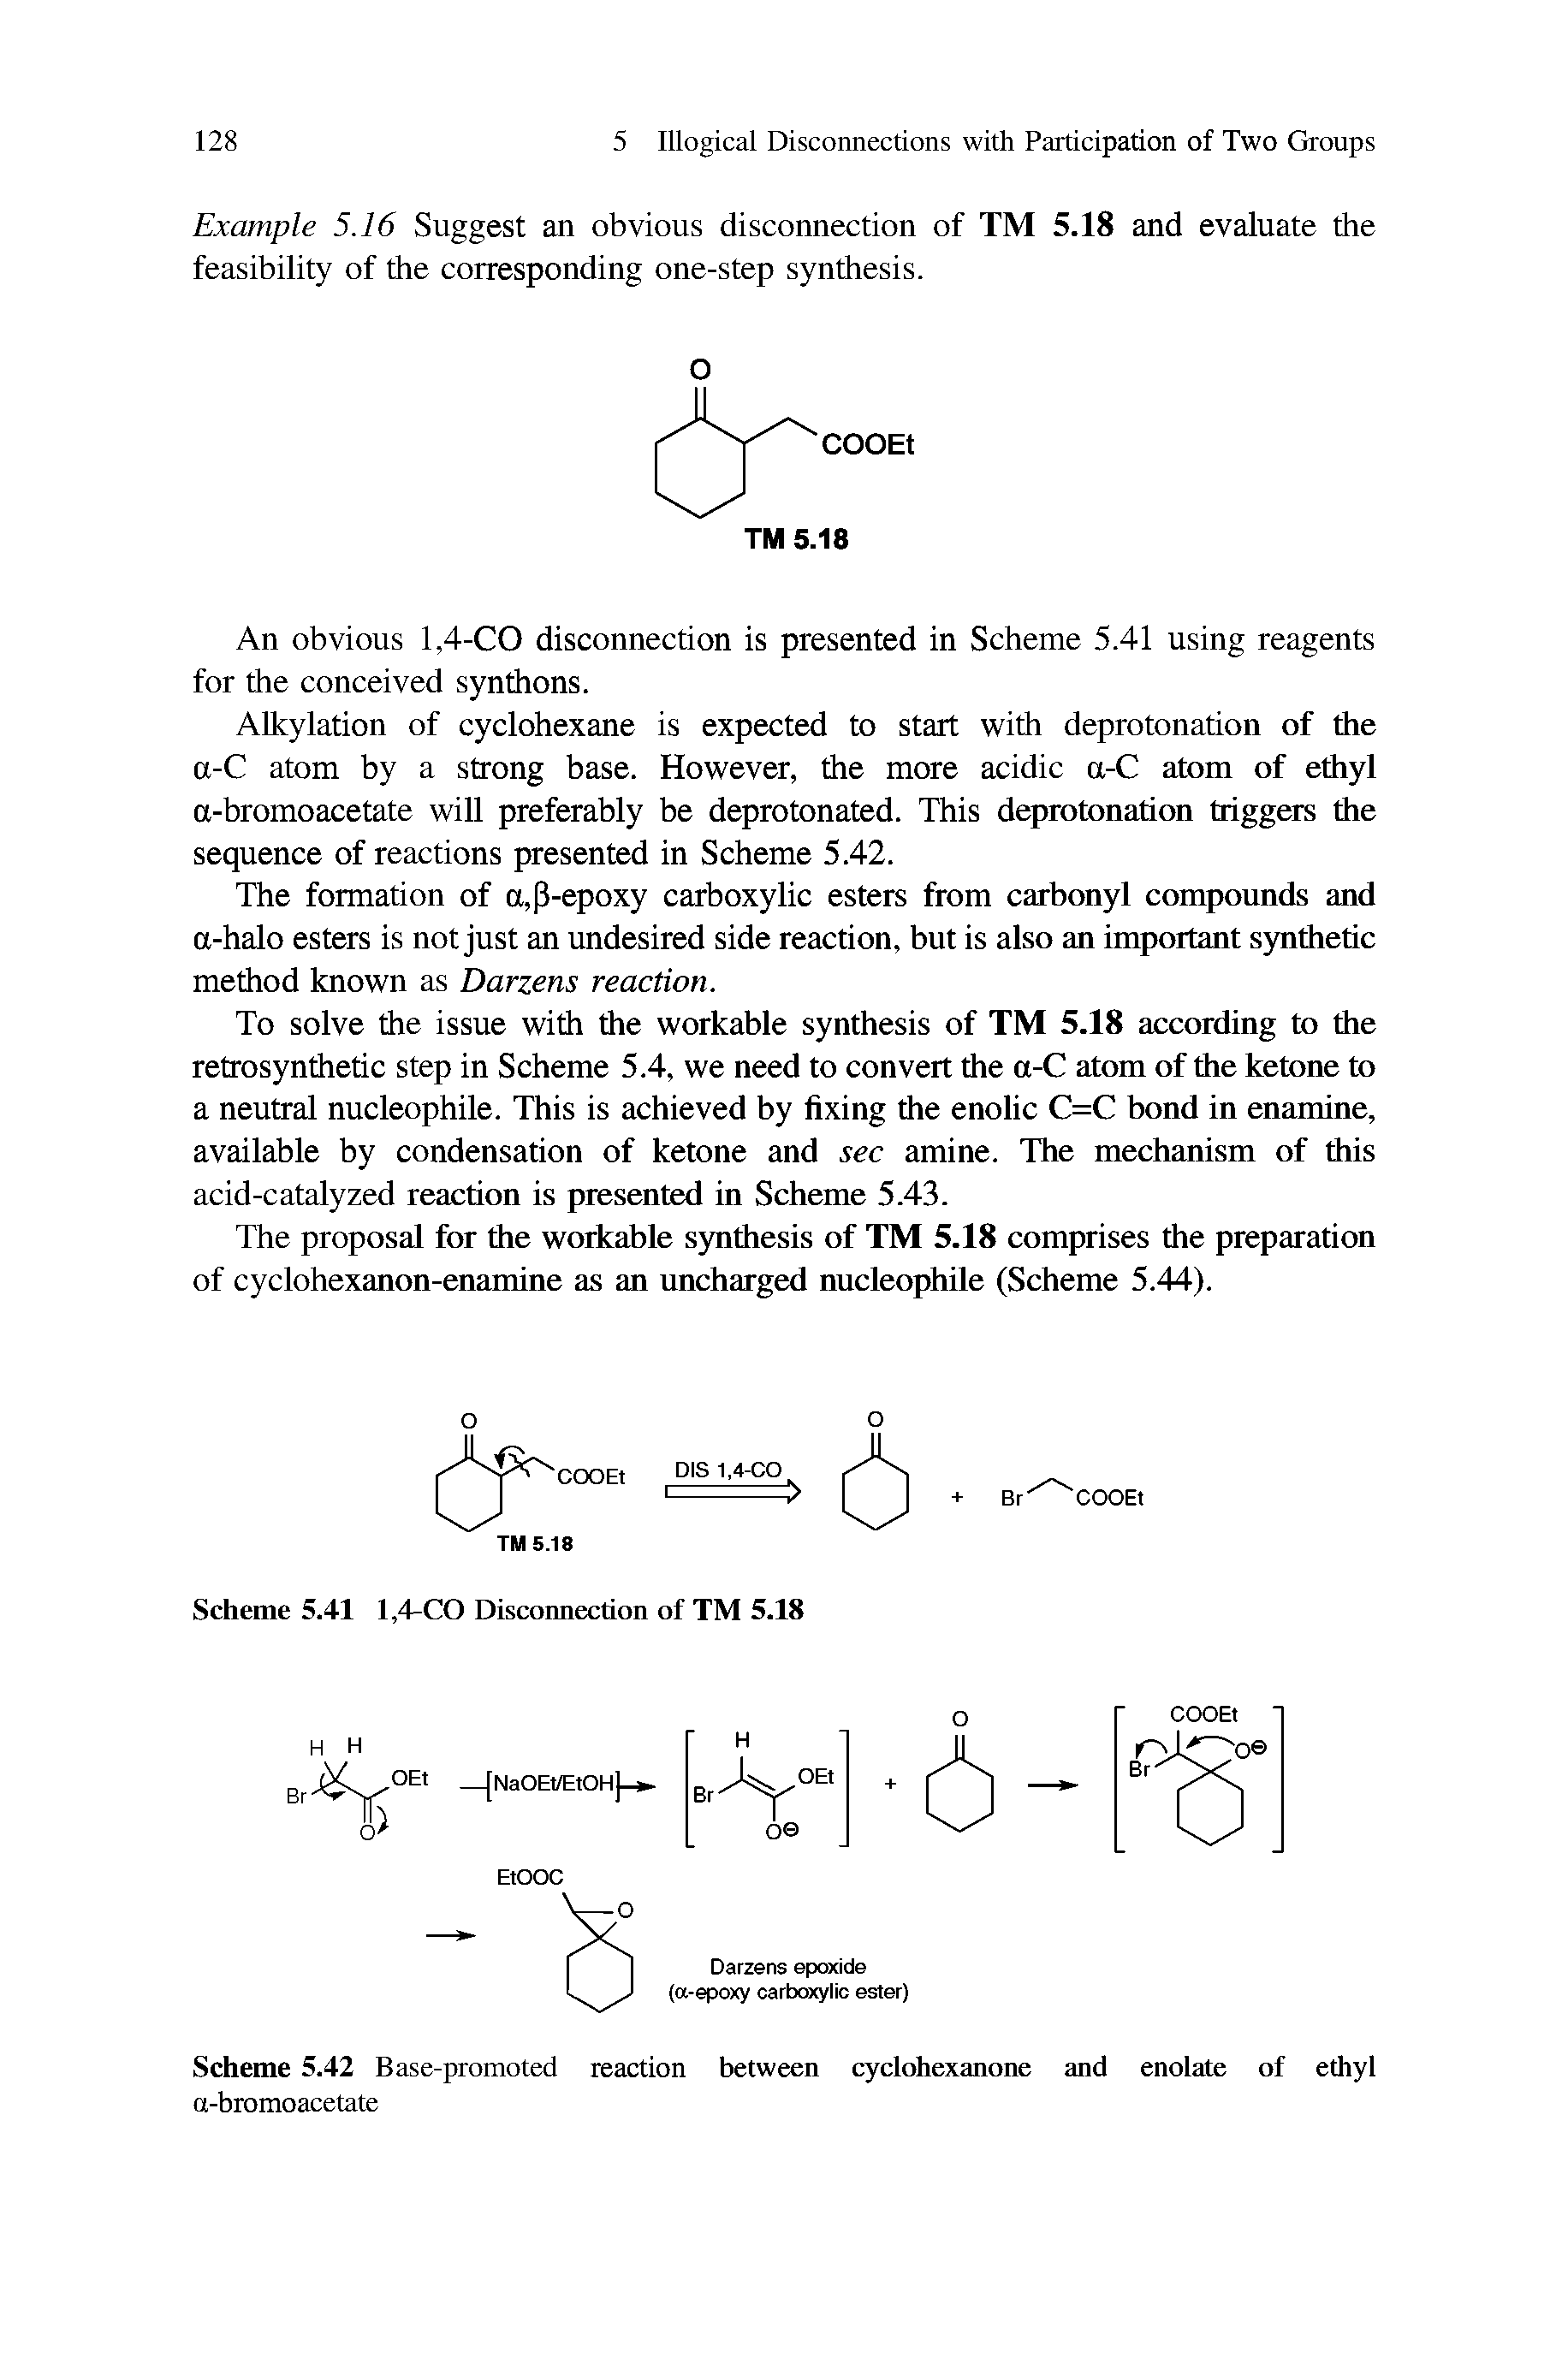 Scheme 5.42 Base-promoted reaction between cyclohexanone and enolate of ethyl a-bromoacetate...